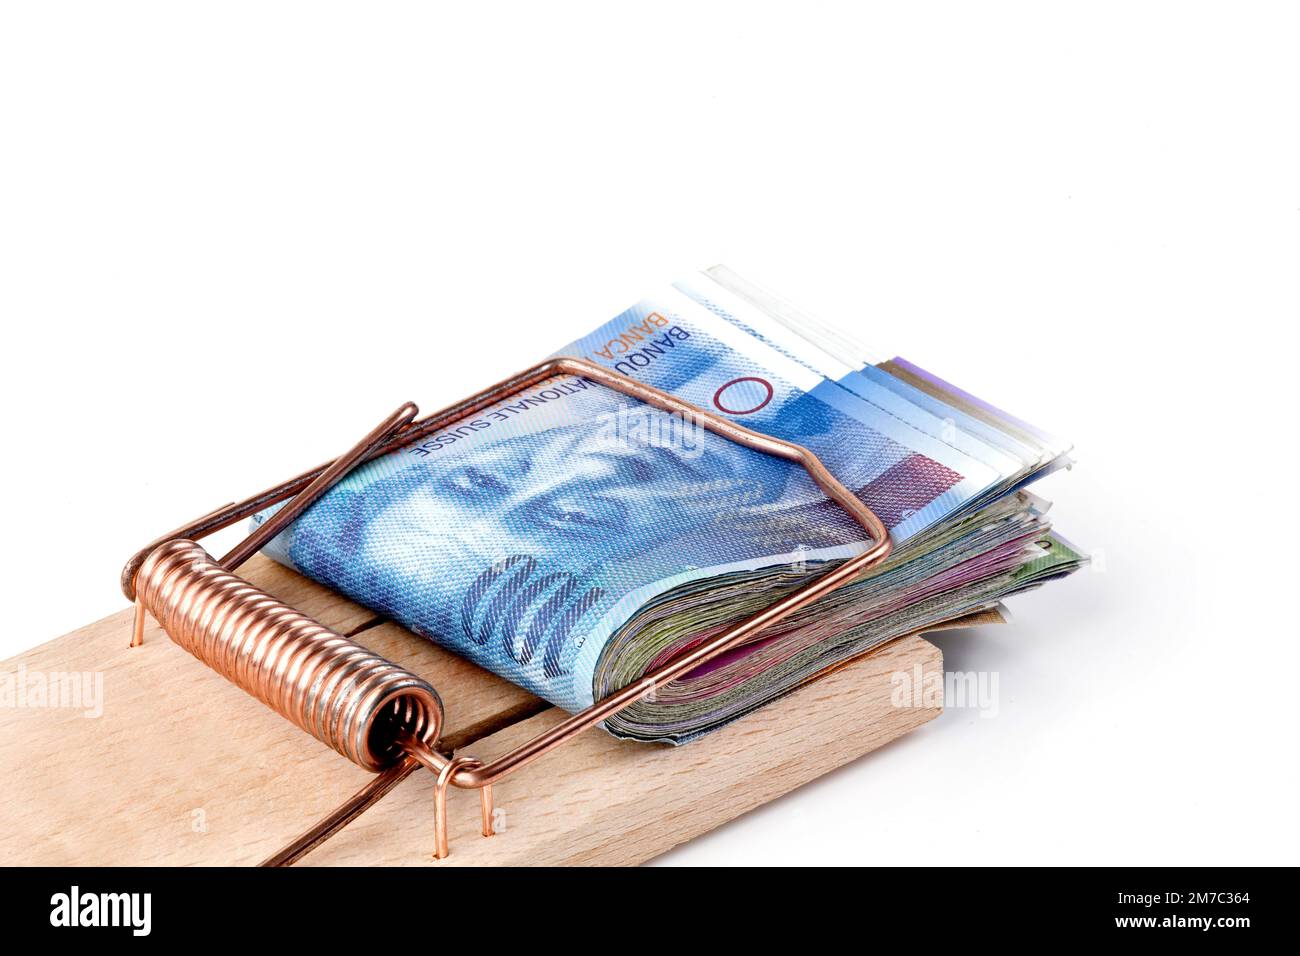 Swiss francs in a mousetrap, dept trap, Switzerland Stock Photo